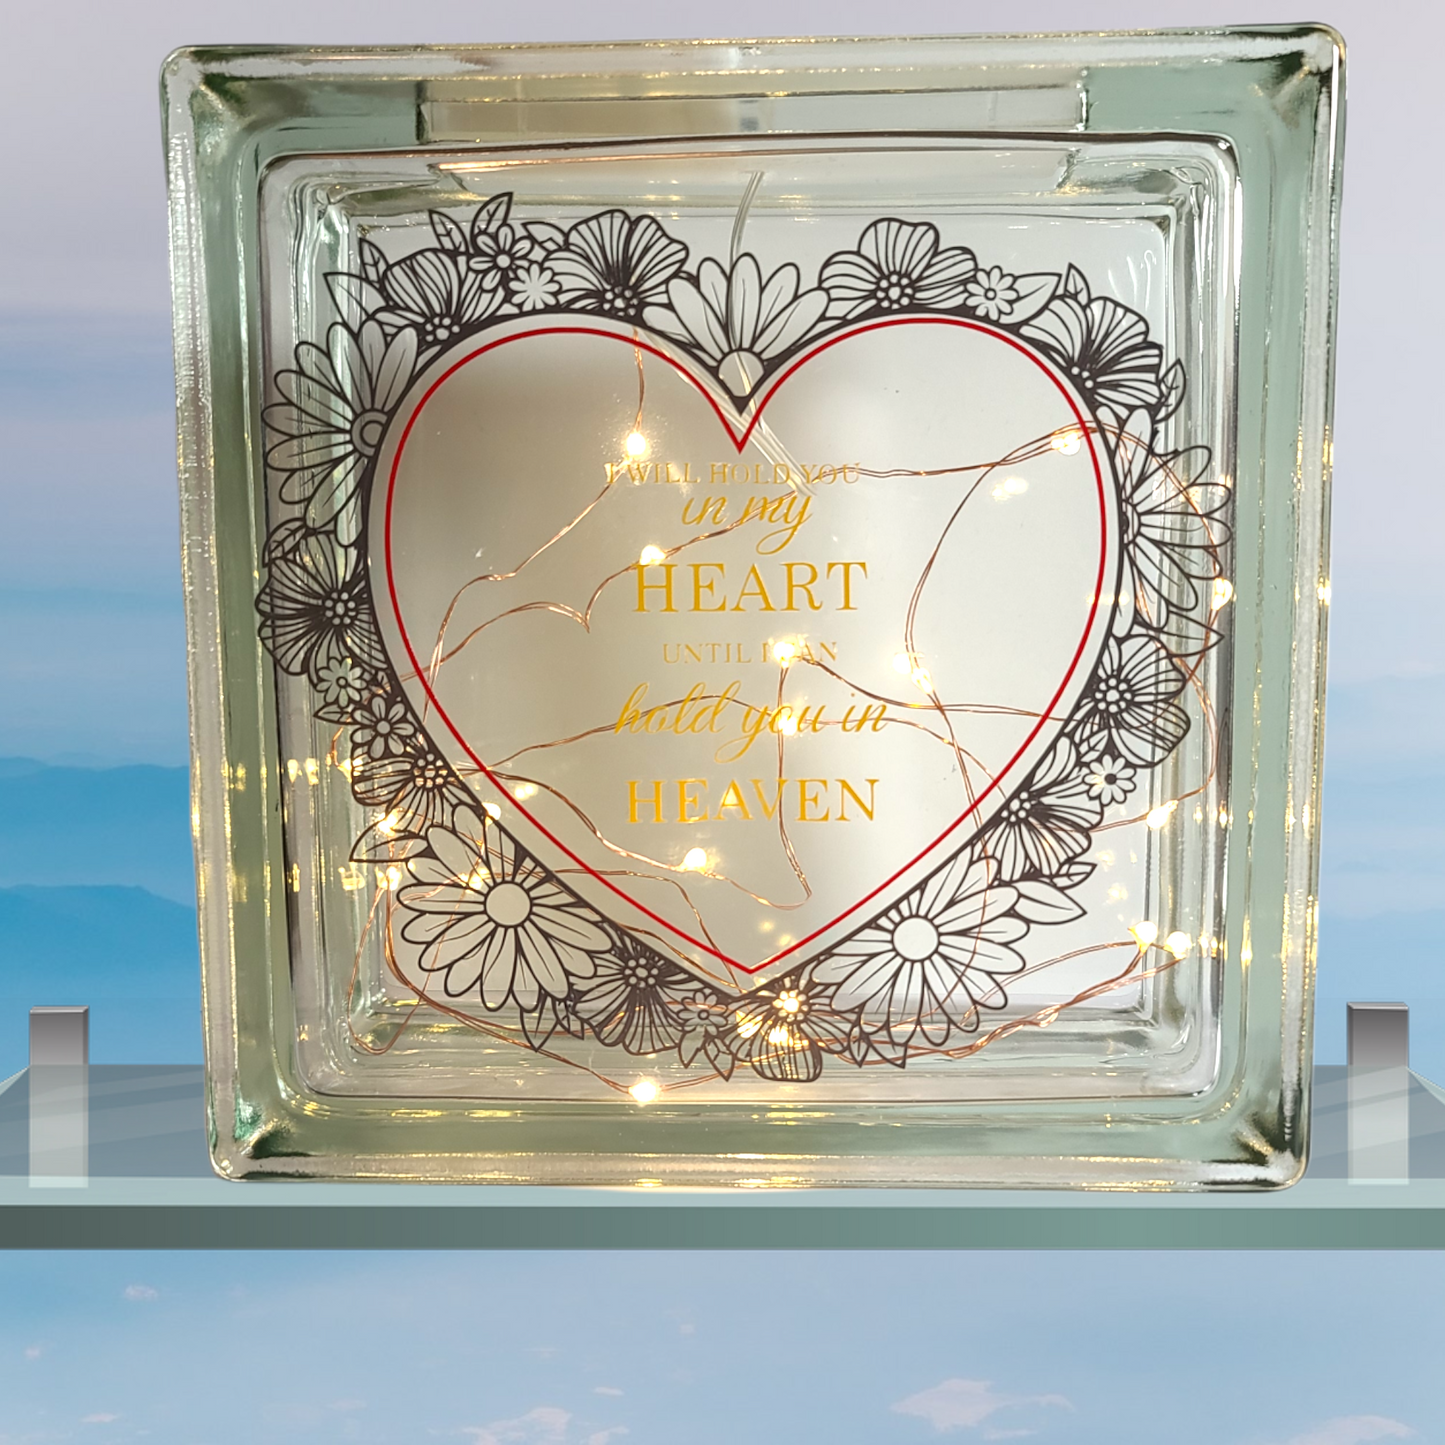 Memorial glass, Grief glass, Mourning glass box, LED Memorial, condolence gift, Deceased Memorial, Remembrance box, hold you in my heart